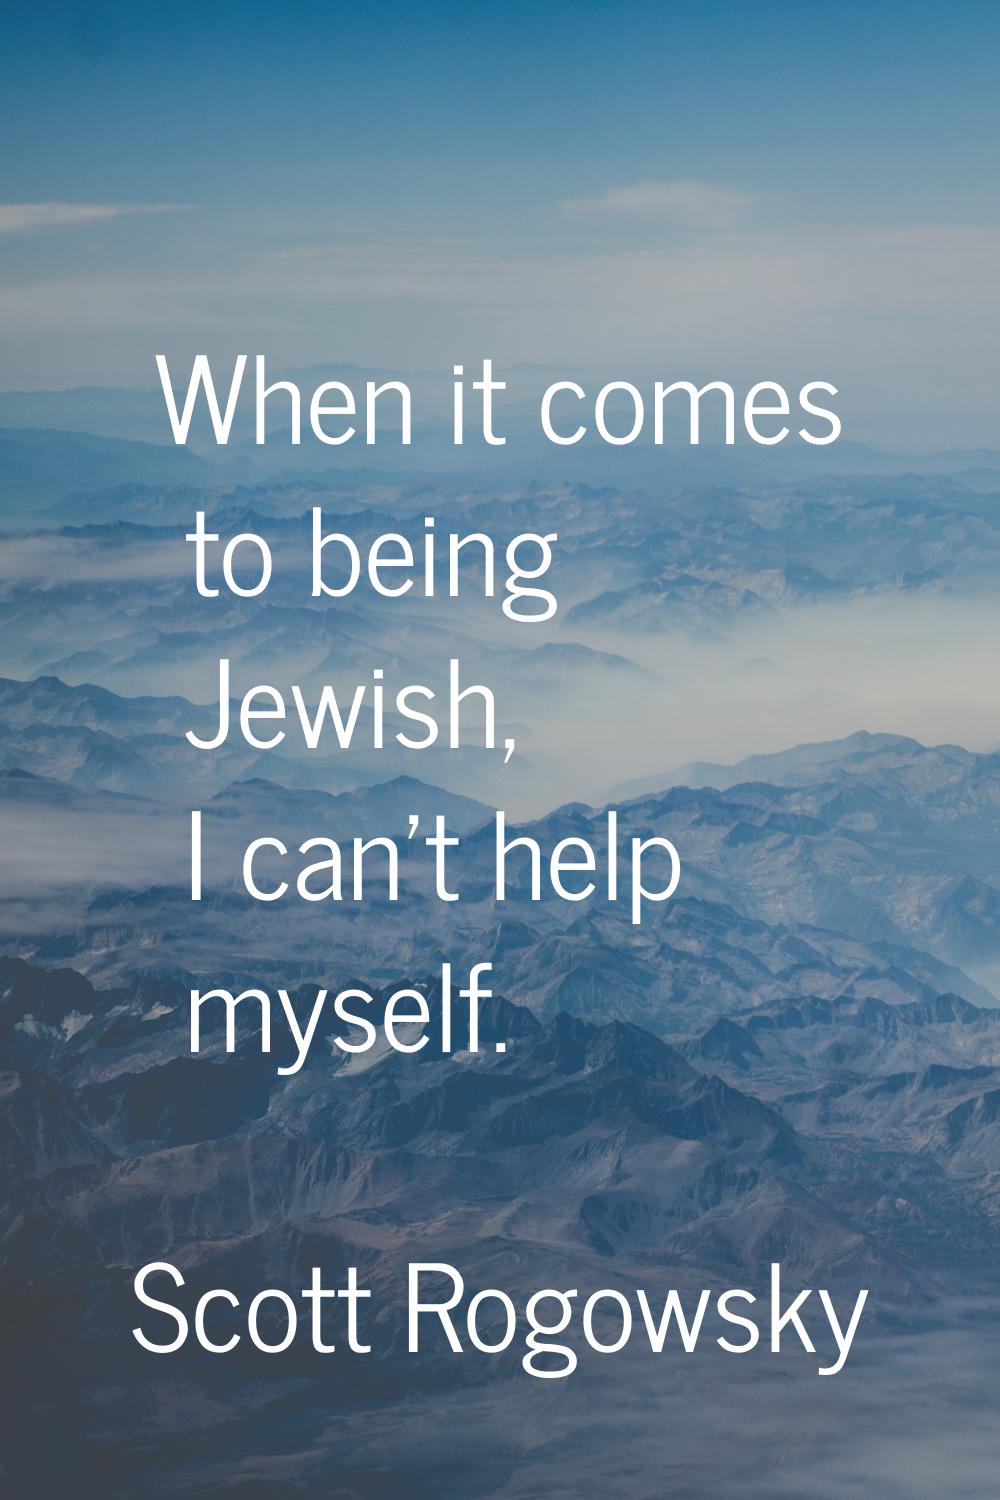 When it comes to being Jewish, I can't help myself.